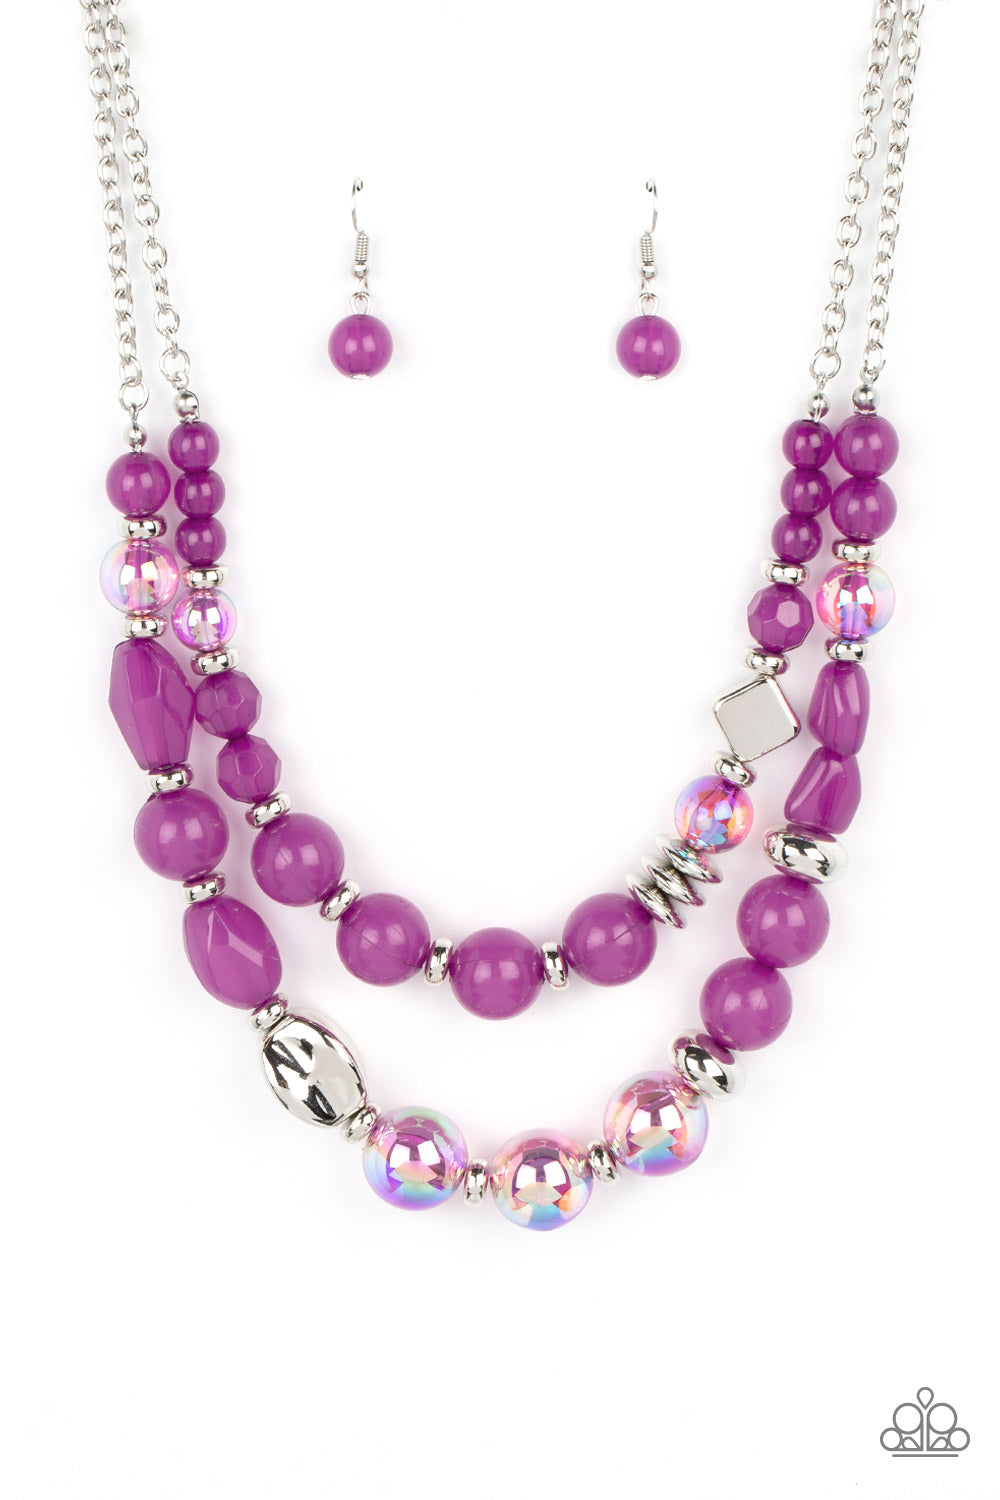 Mere Magic - Purple Iridescent & Opaque Beads/Silver Accent Paparazzi Necklace & matching earrings